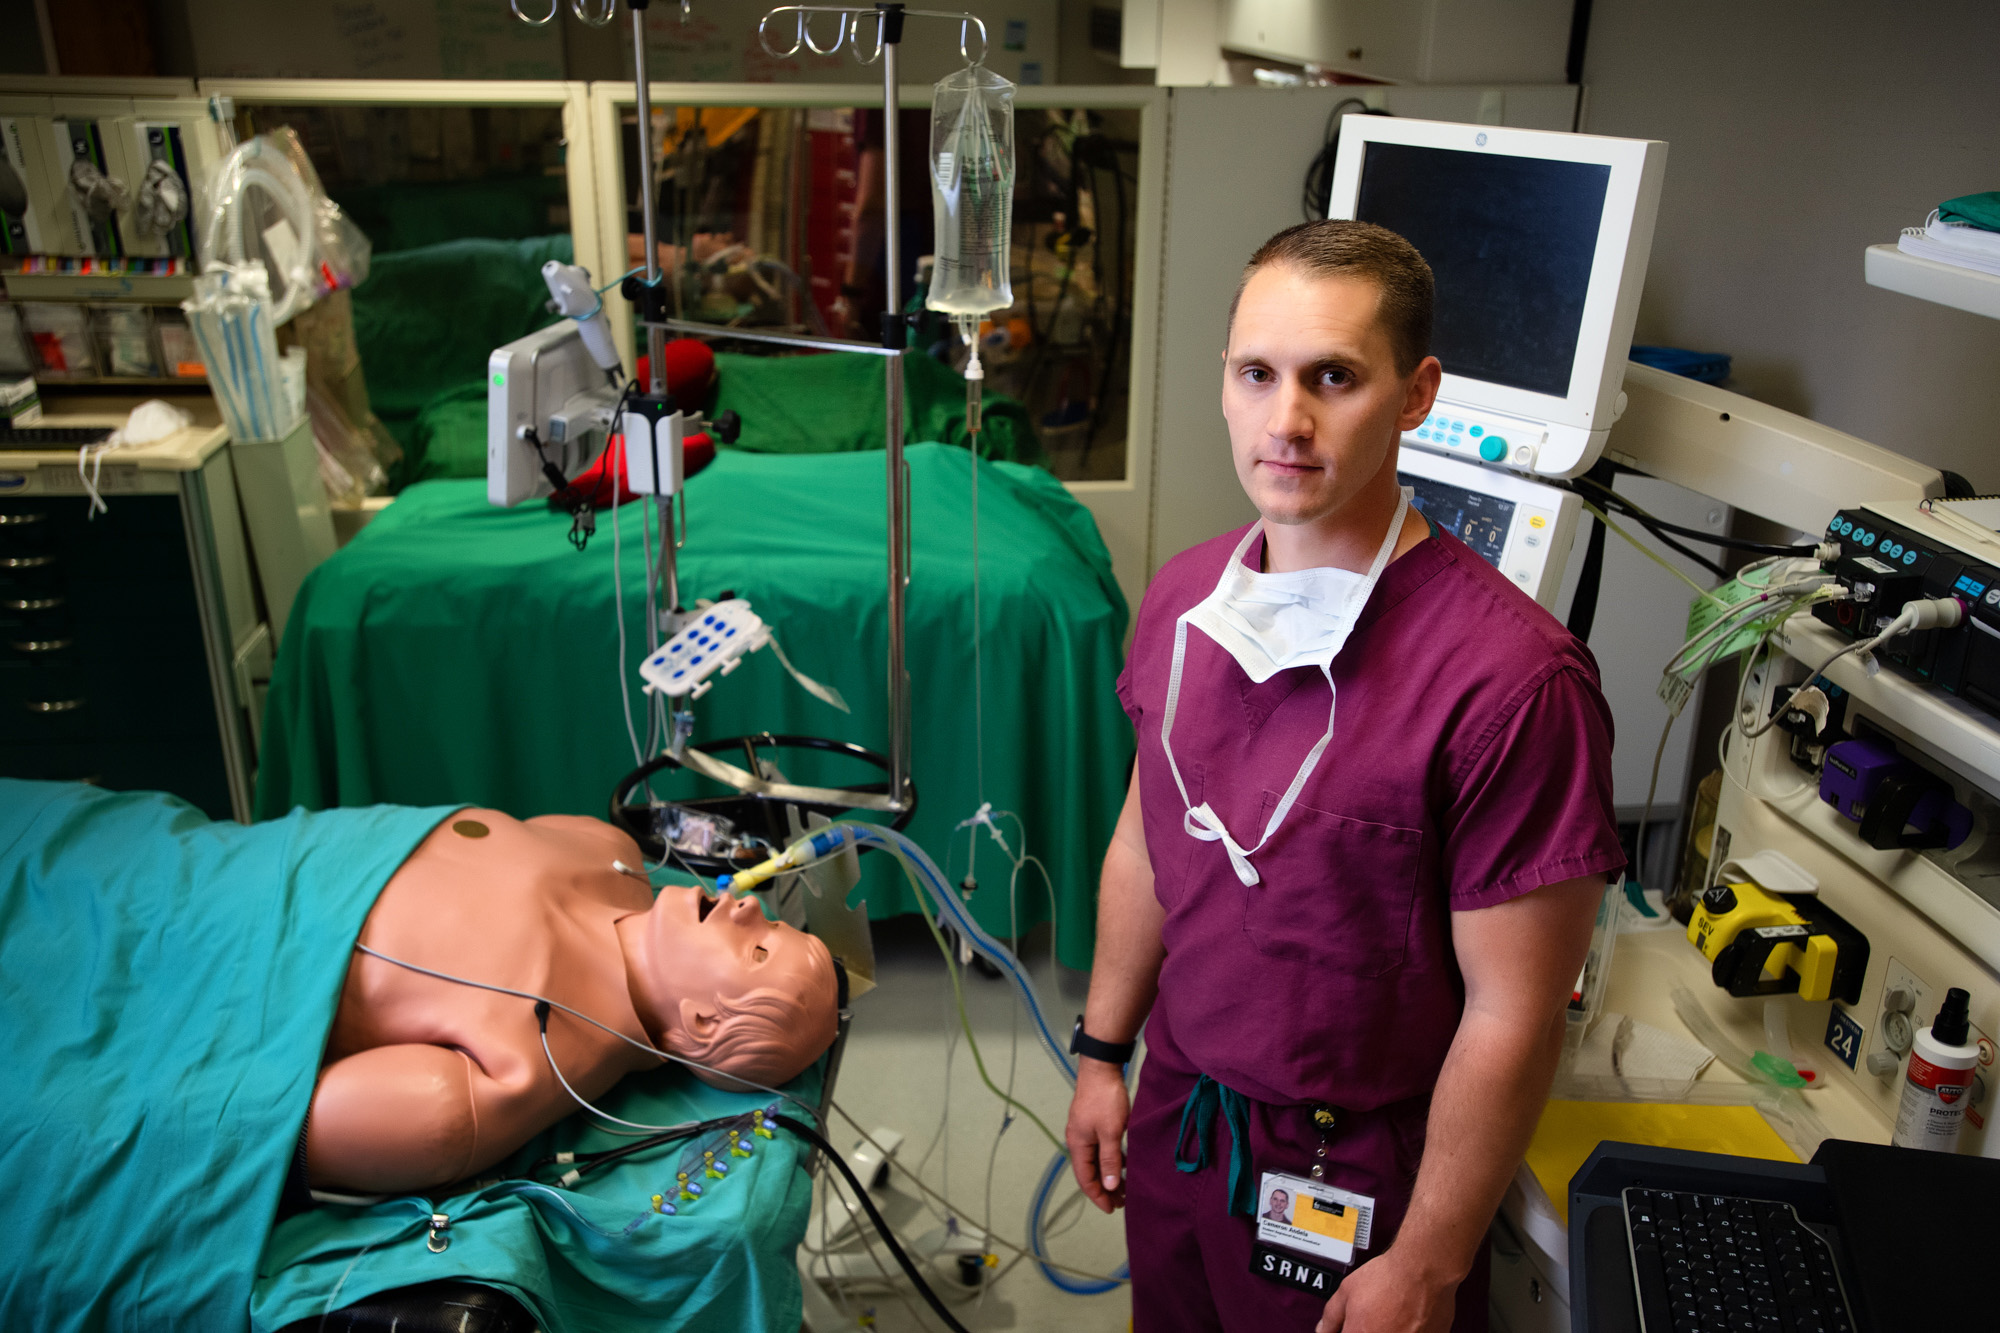 University of Iowa student Cameron Andela standing next to a patient simulator